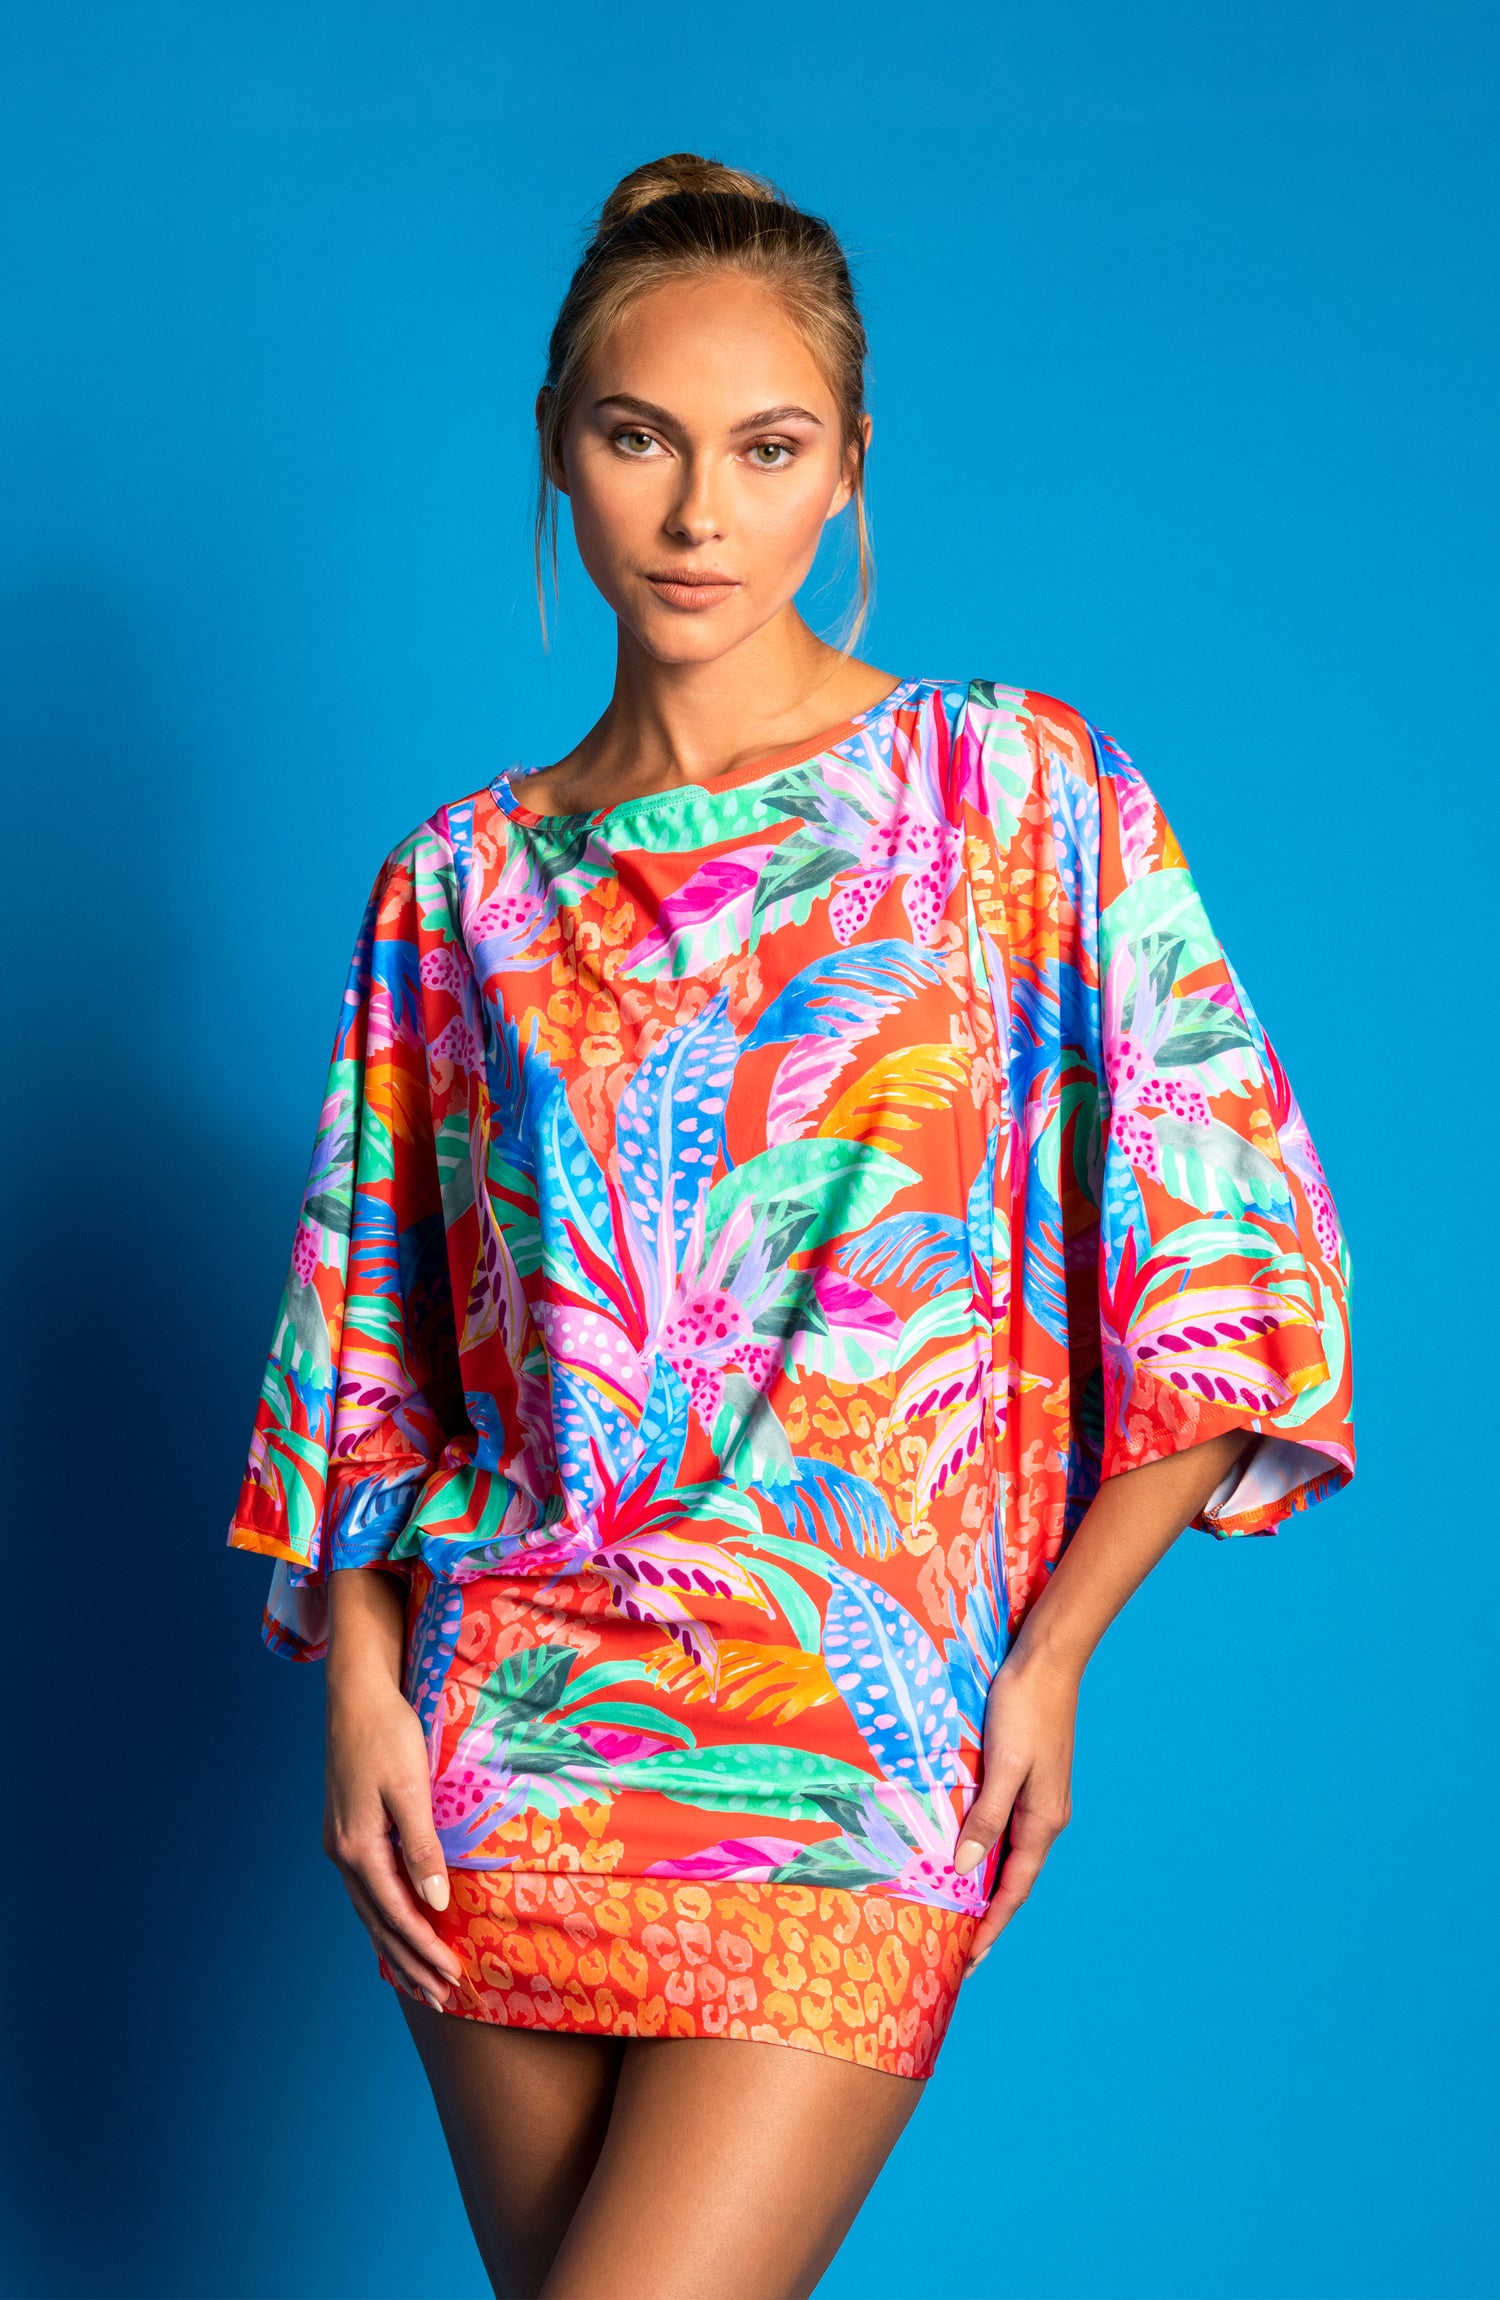 Model wearing a tropical print tunic swimwear cover-up on a blue background.